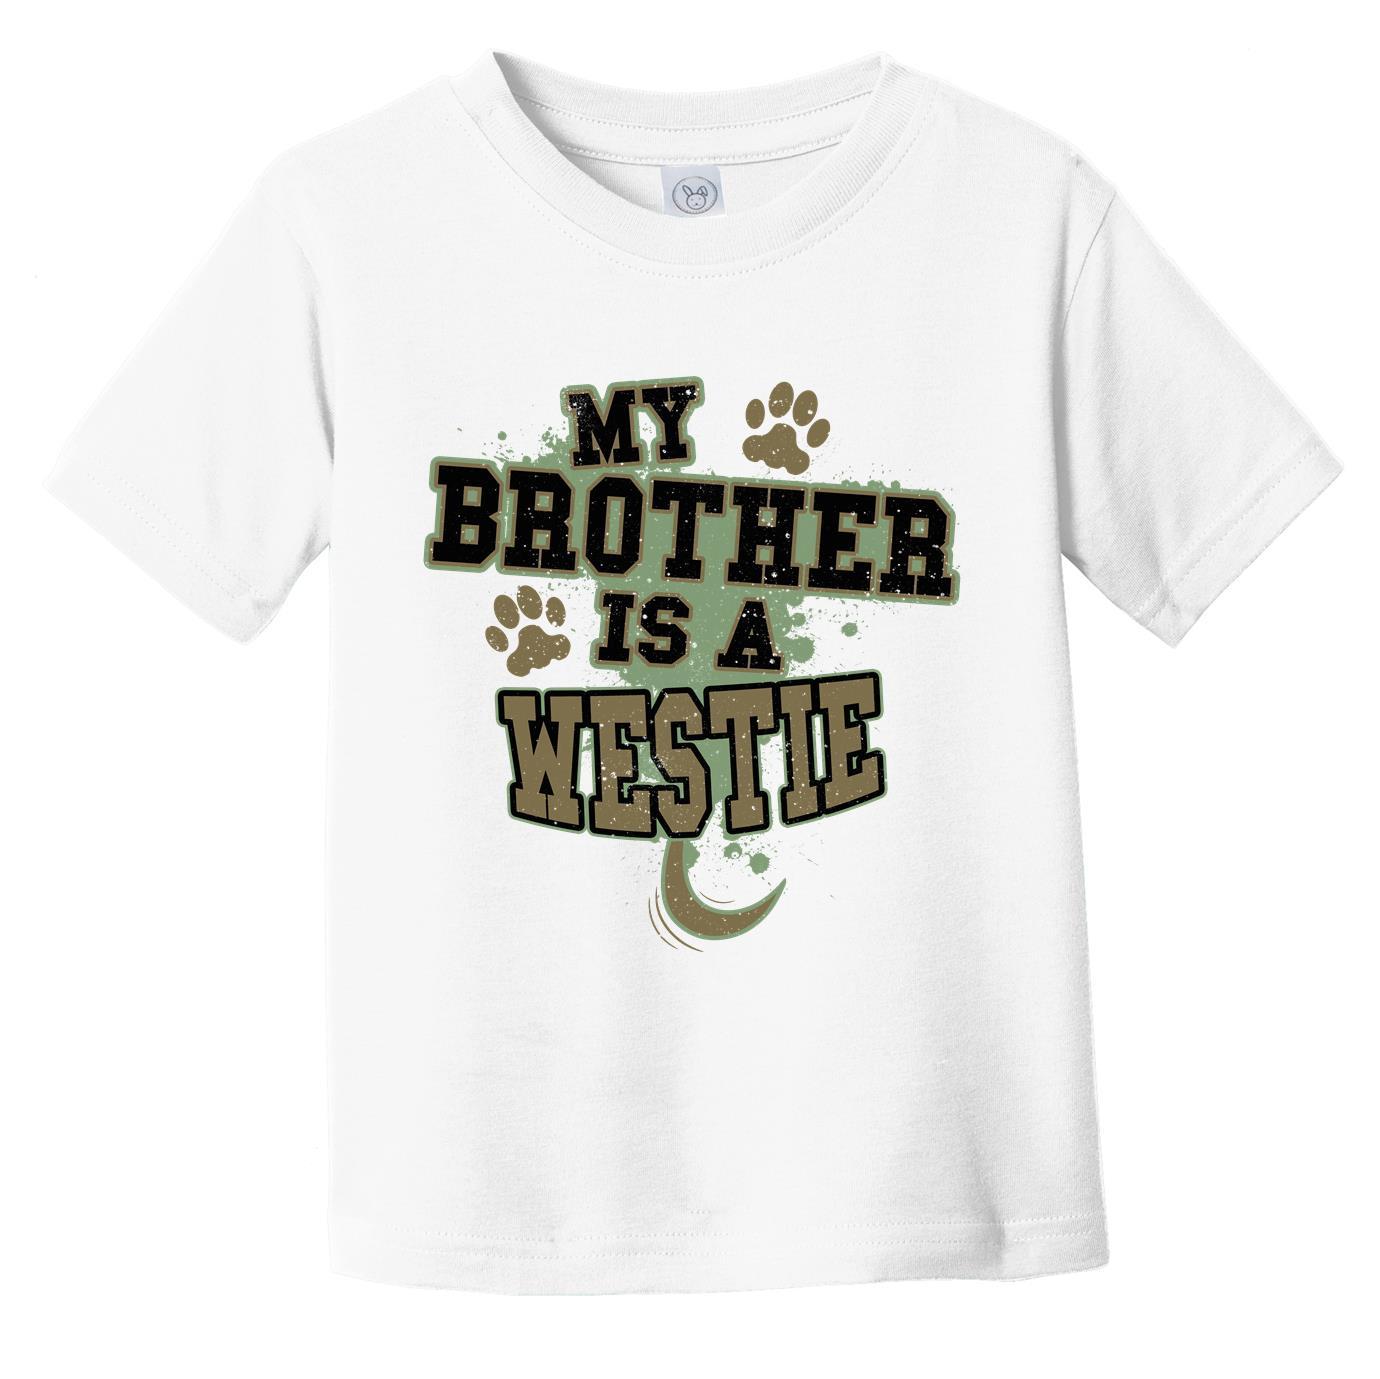 My Brother Is A Westie Funny Dog Infant Toddler T-Shirt